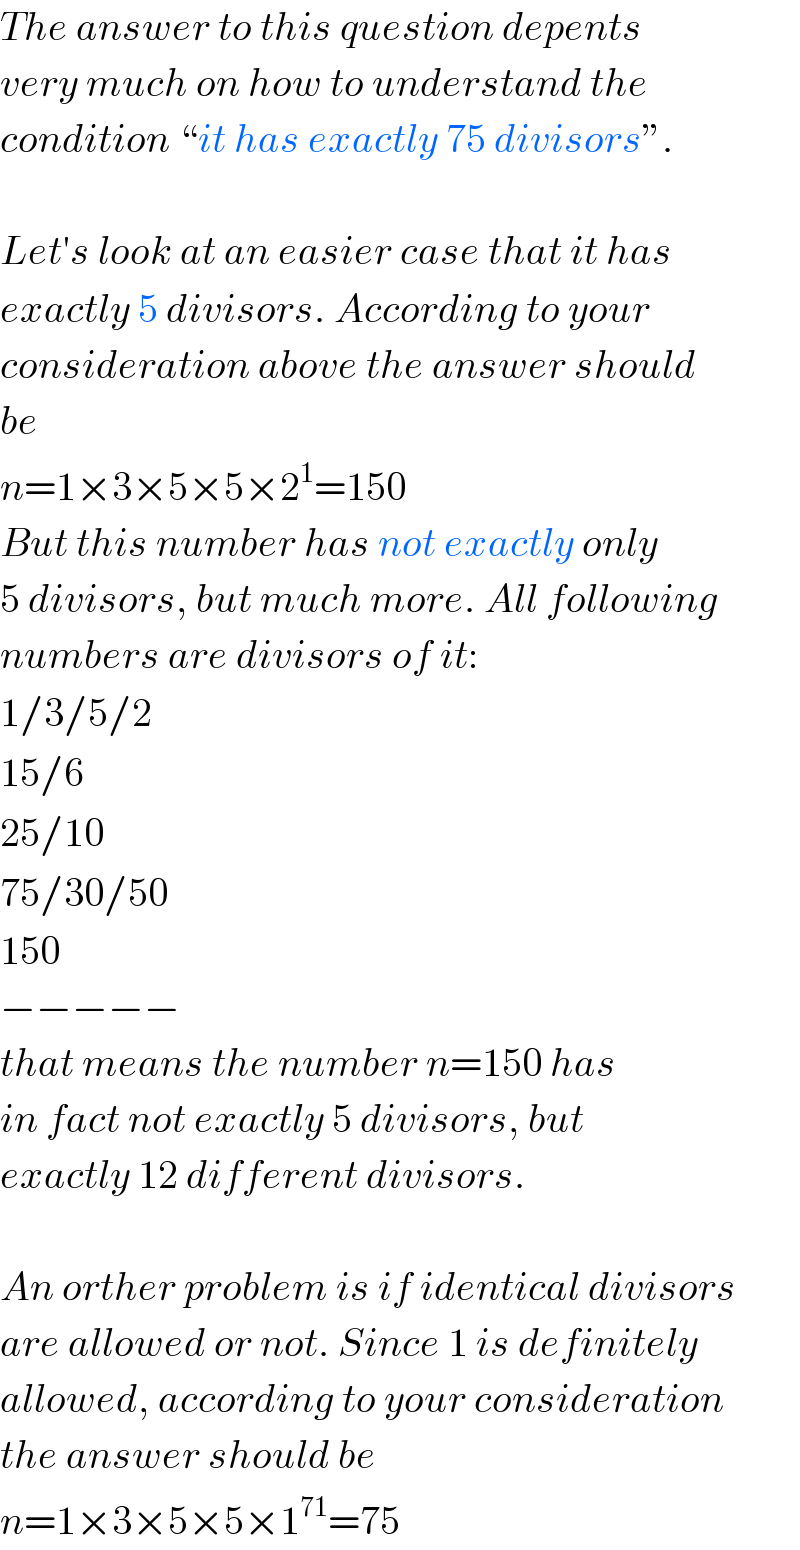 The answer to this question depents  very much on how to understand the  condition “it has exactly 75 divisors”.    Let′s look at an easier case that it has  exactly 5 divisors. According to your  consideration above the answer should  be  n=1×3×5×5×2^1 =150  But this number has not exactly only  5 divisors, but much more. All following  numbers are divisors of it:  1/3/5/2  15/6  25/10  75/30/50  150  −−−−−  that means the number n=150 has  in fact not exactly 5 divisors, but  exactly 12 different divisors.    An orther problem is if identical divisors  are allowed or not. Since 1 is definitely  allowed, according to your consideration  the answer should be  n=1×3×5×5×1^(71) =75  